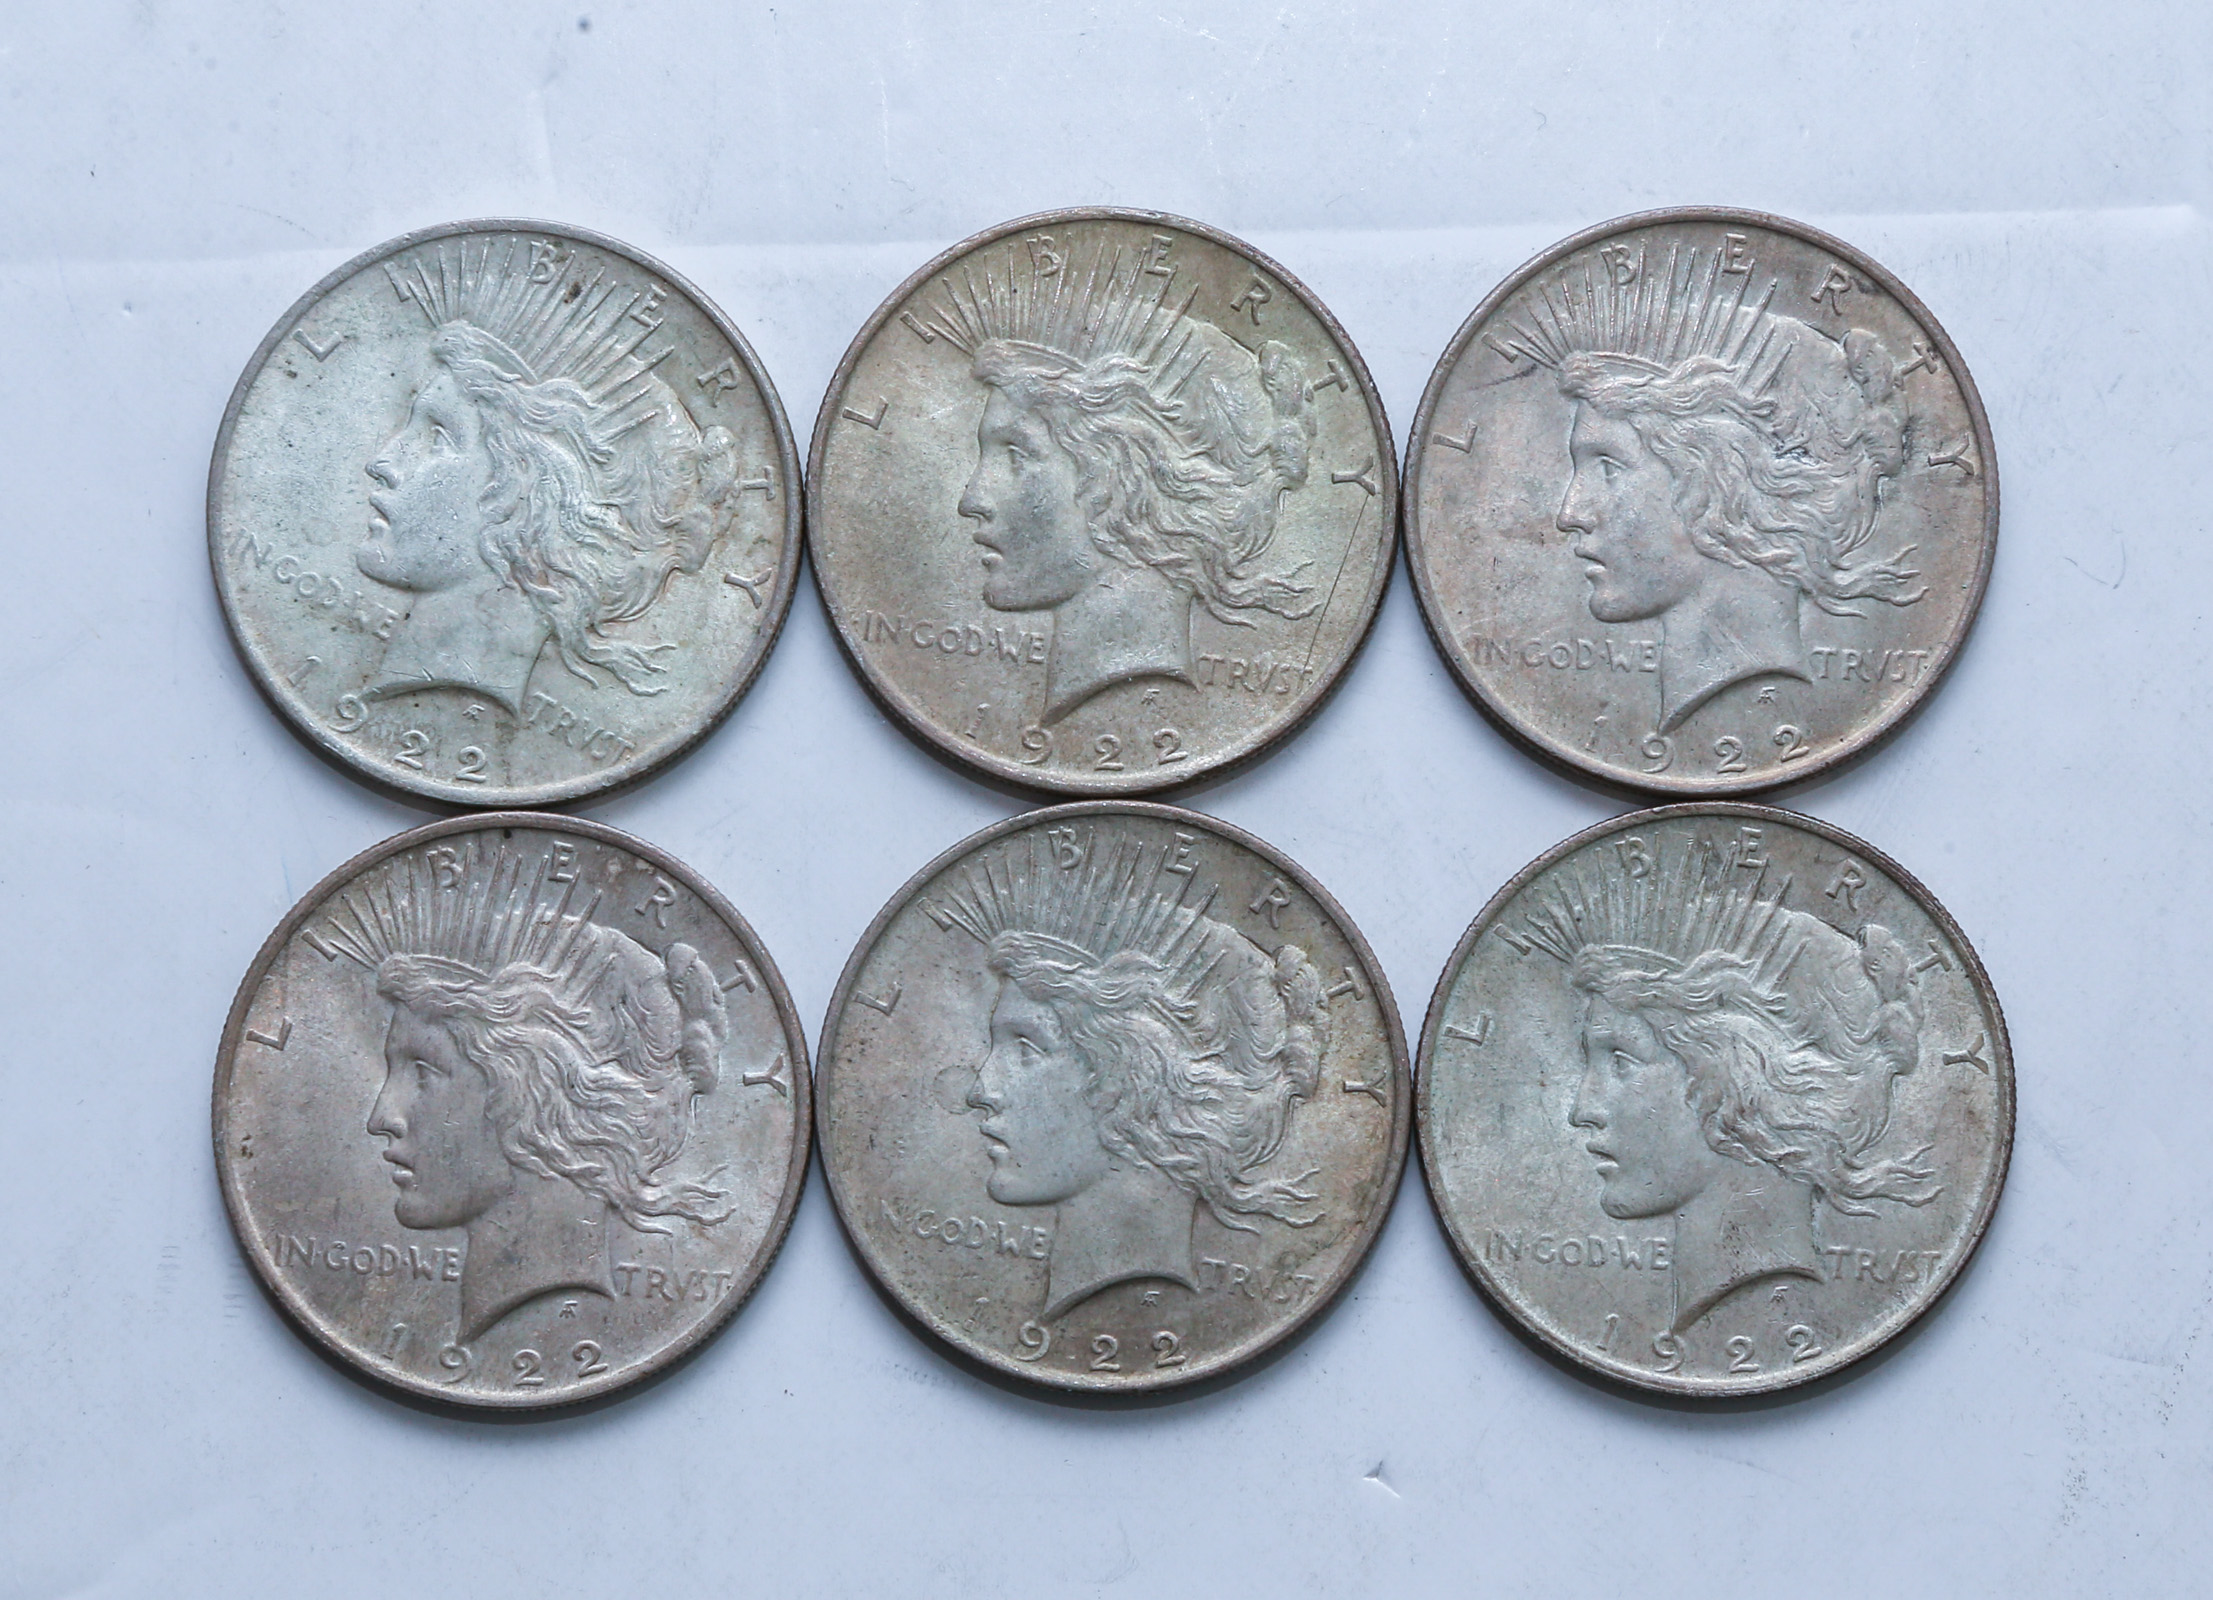 SIX 1922 PEACE DOLLARS VF and 5 XF  3caf92